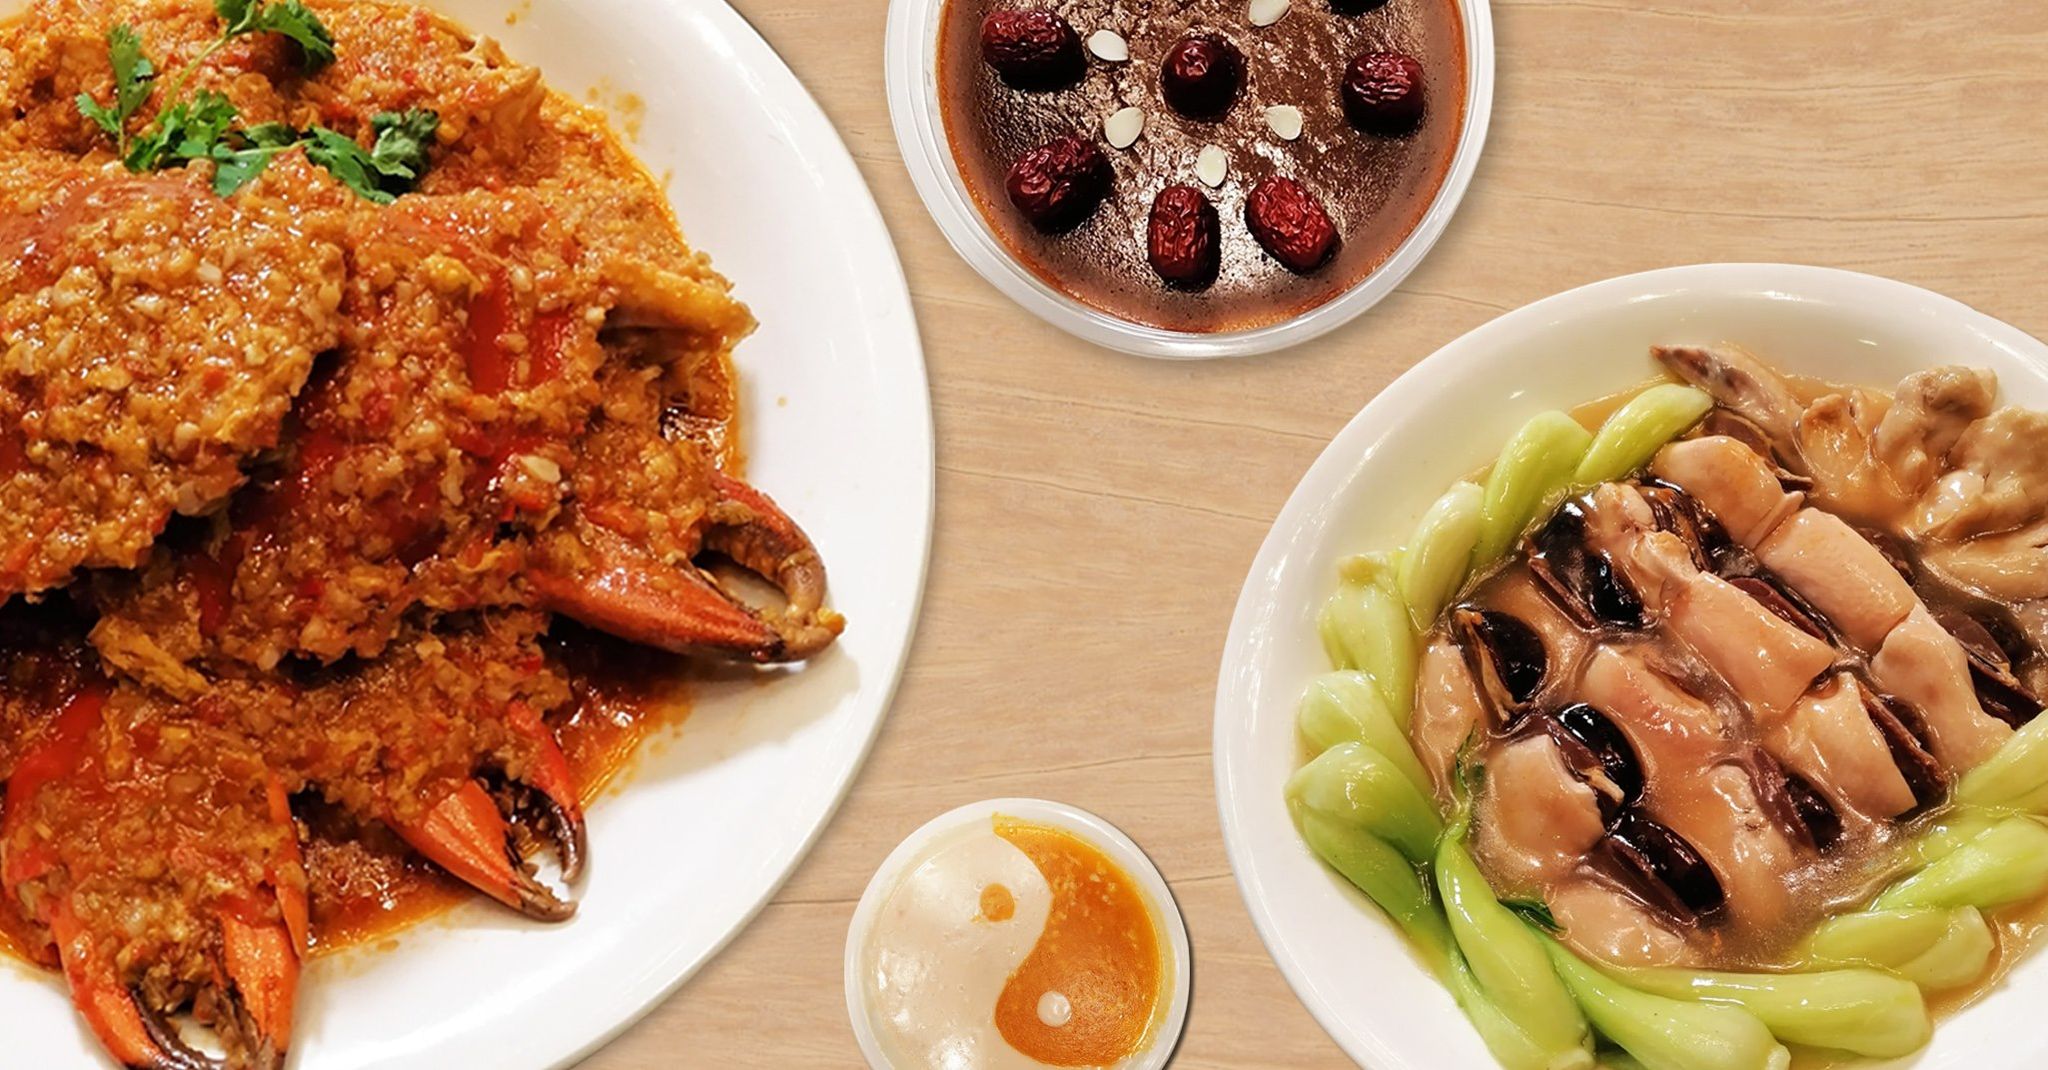 Experience an ‘Ox-plosion’ of flavors with this iconic Chinese restaurant